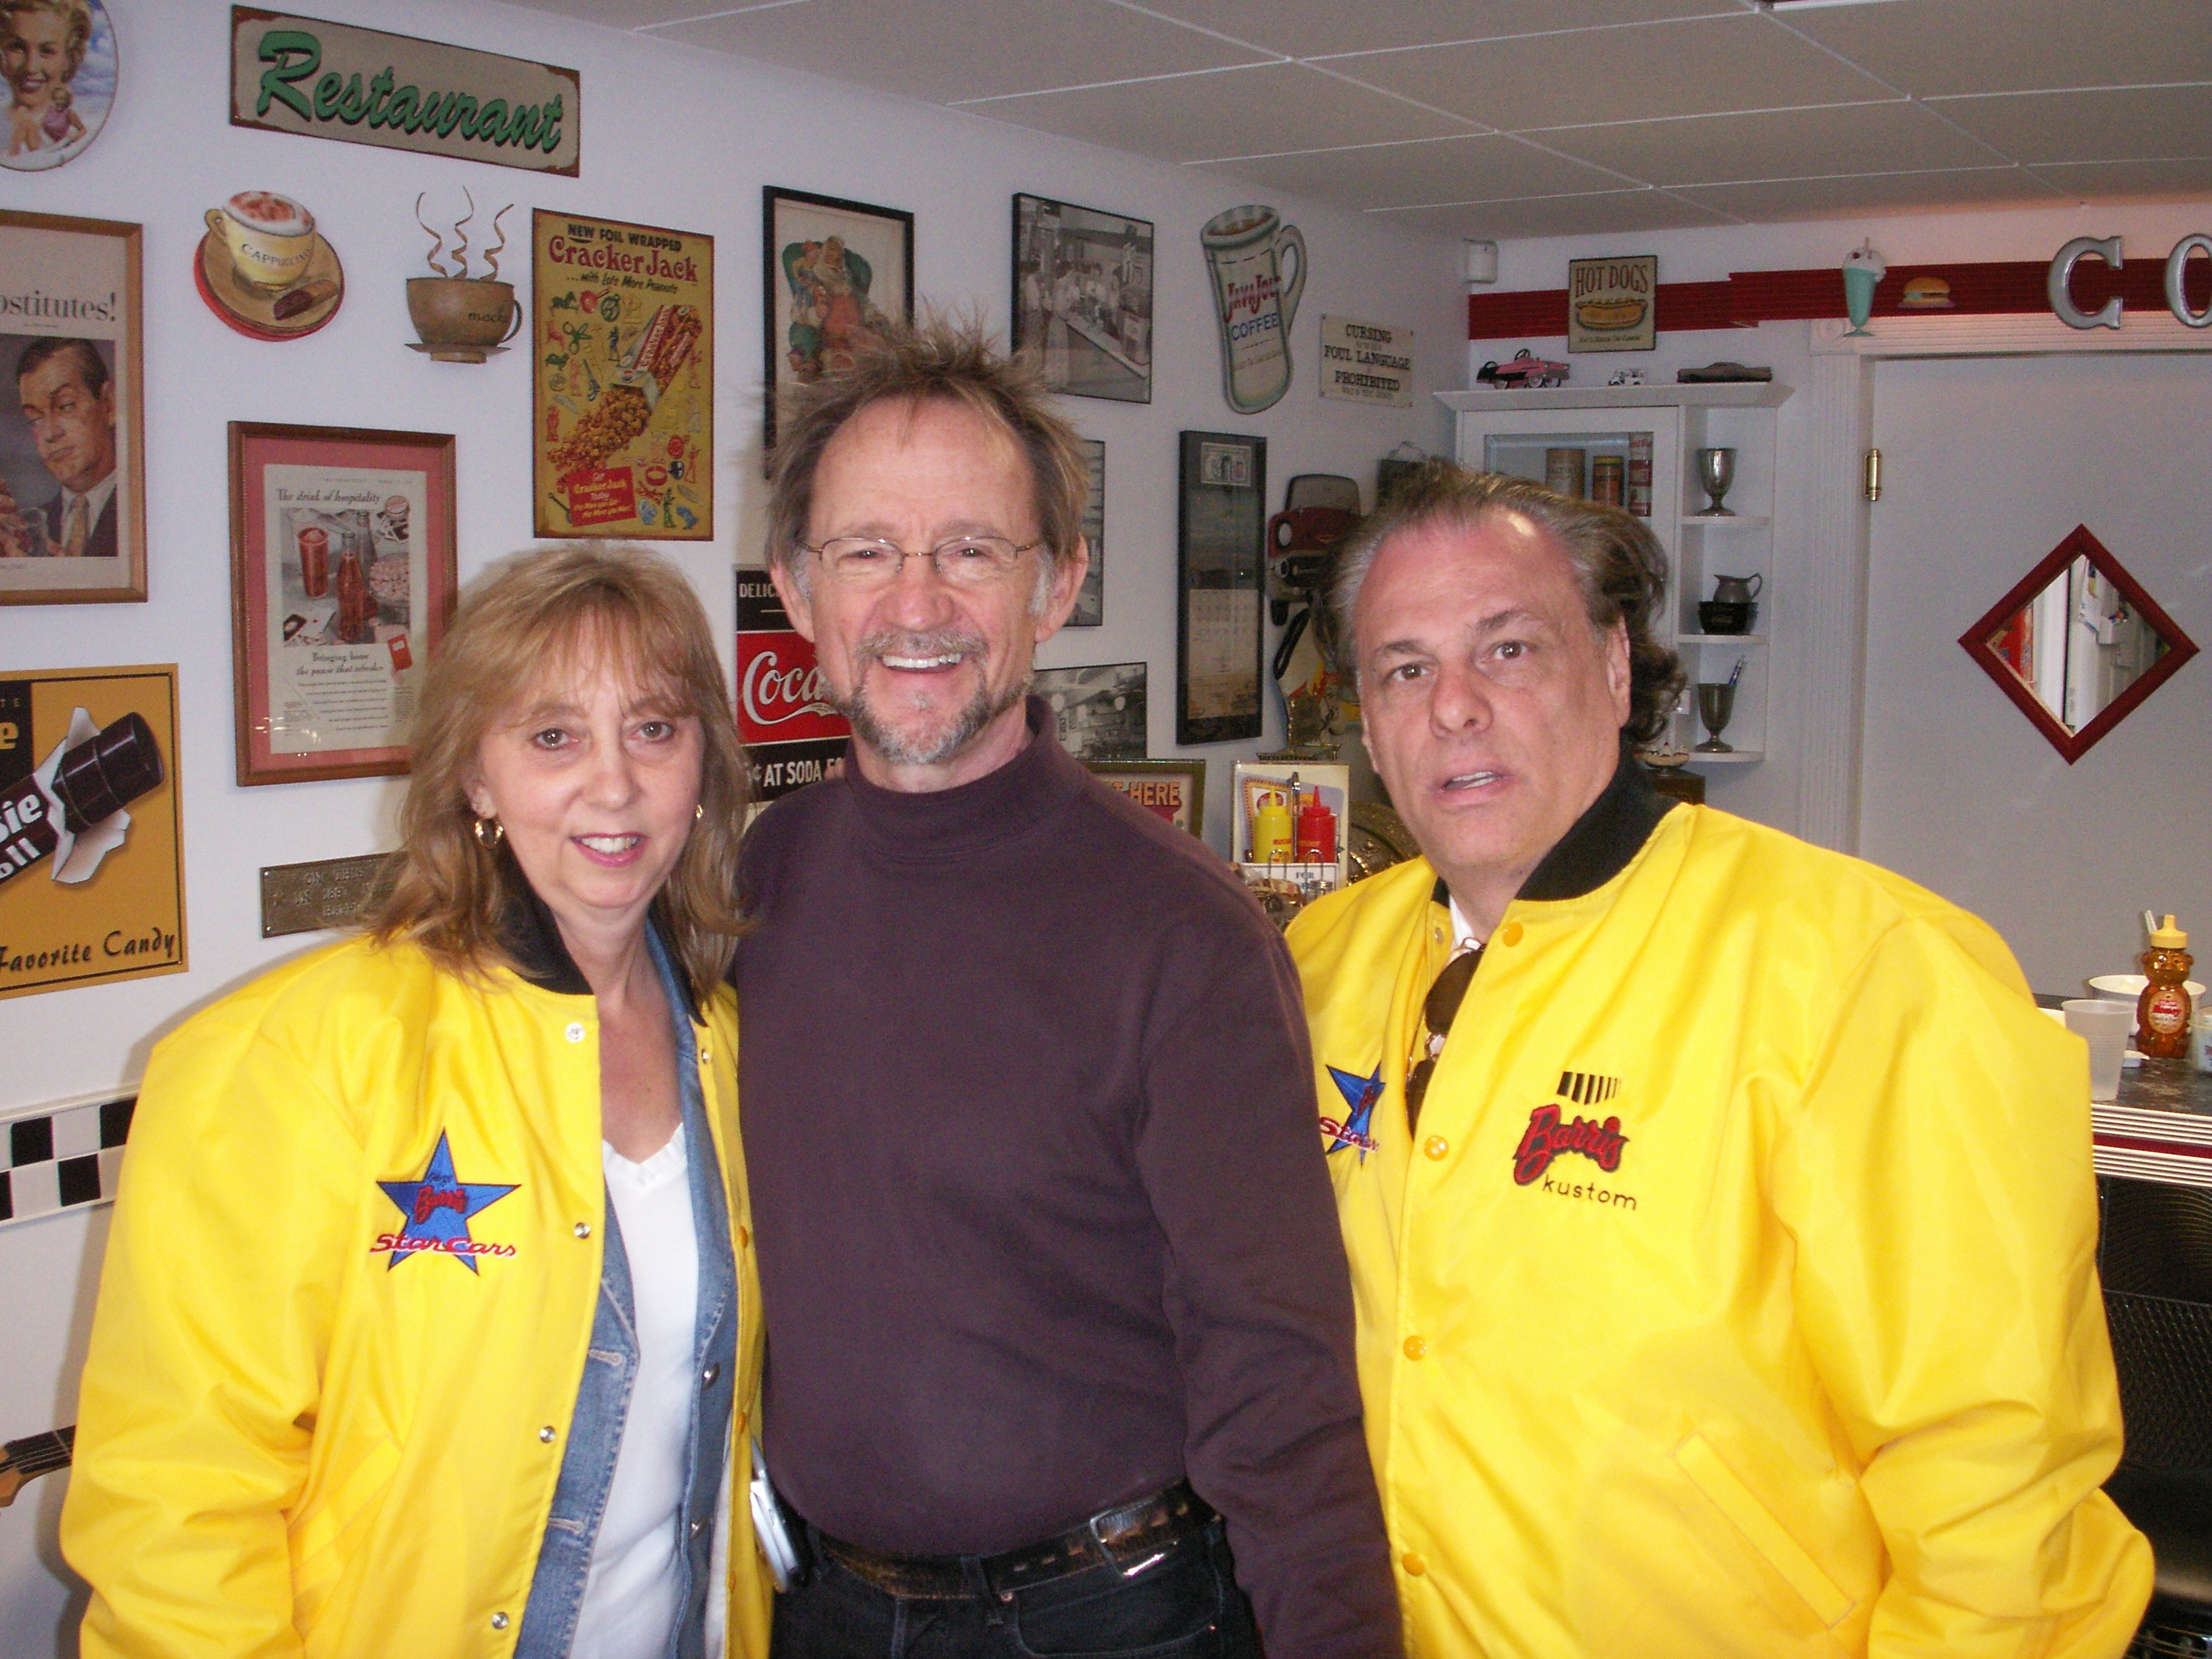 me and my wife with peter tauk of the monkees